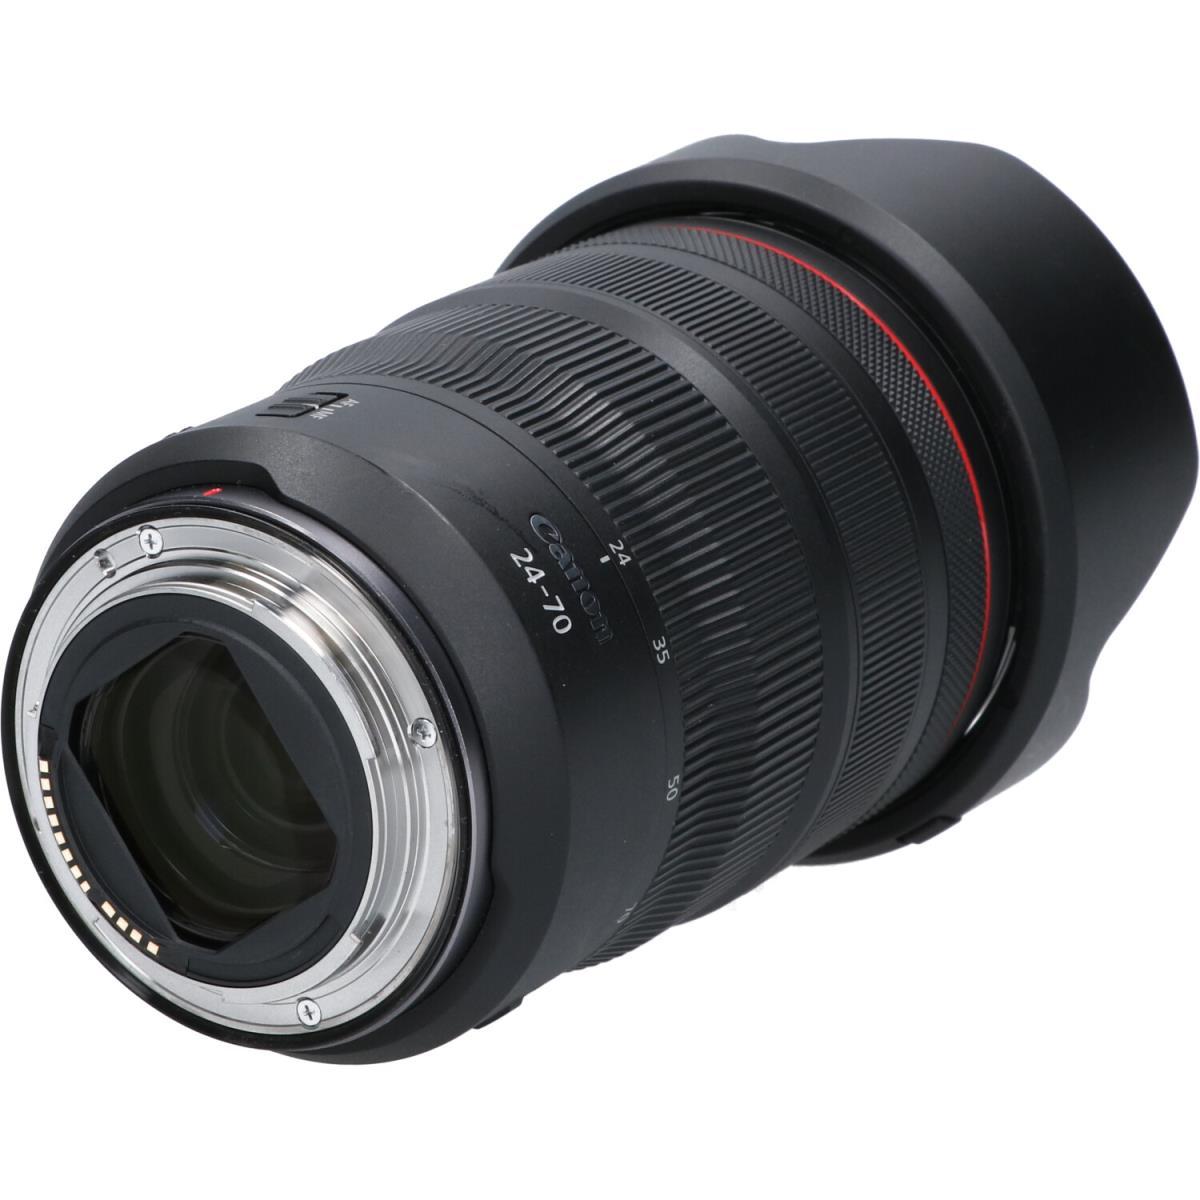 CANON RF24-70mm F2.8L IS USM